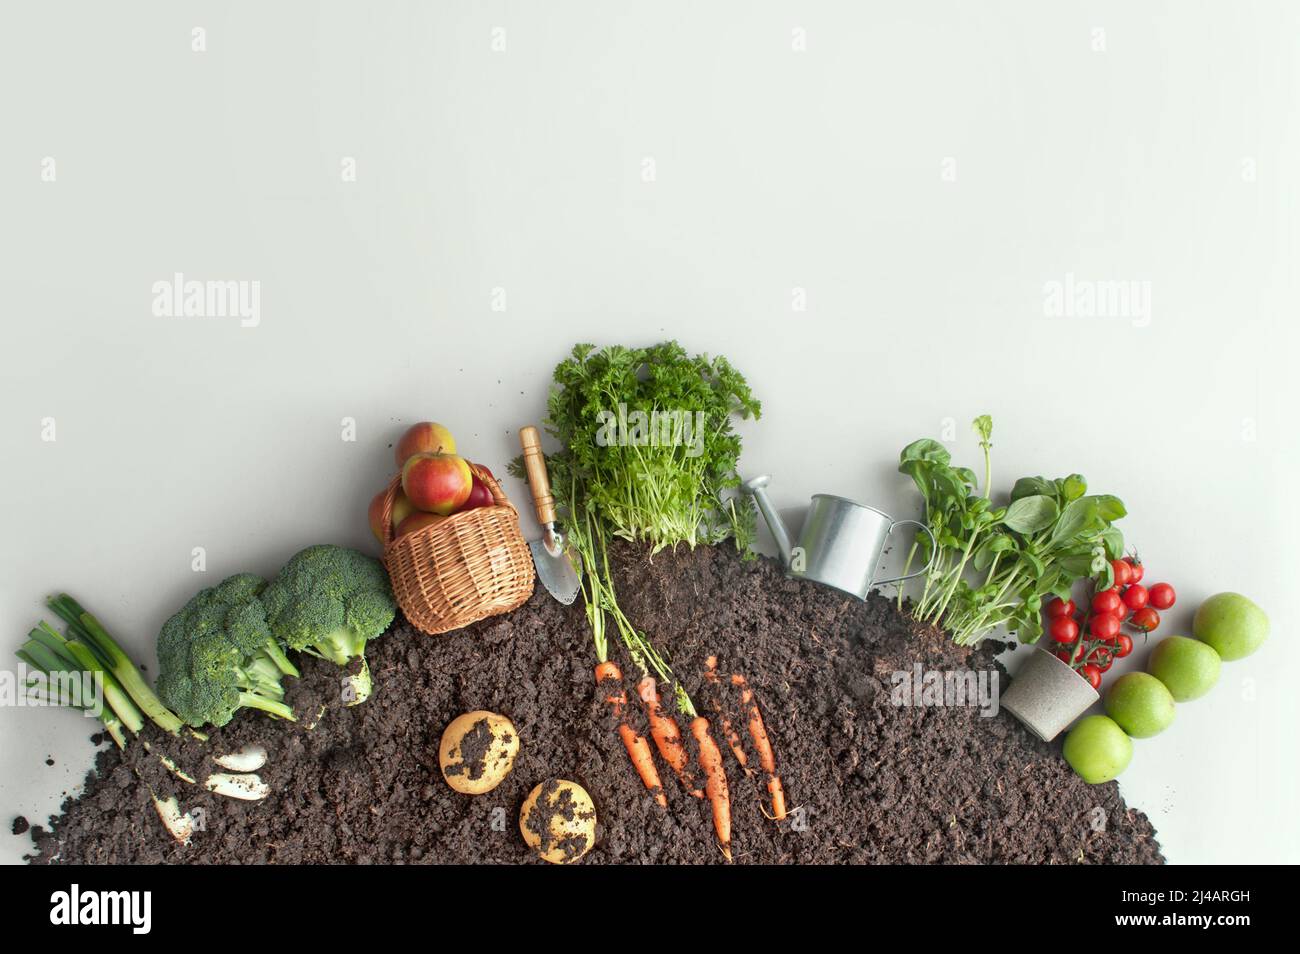 Fruits and vegetables growing in circular garden compost including carrots, potatoes Stock Photo